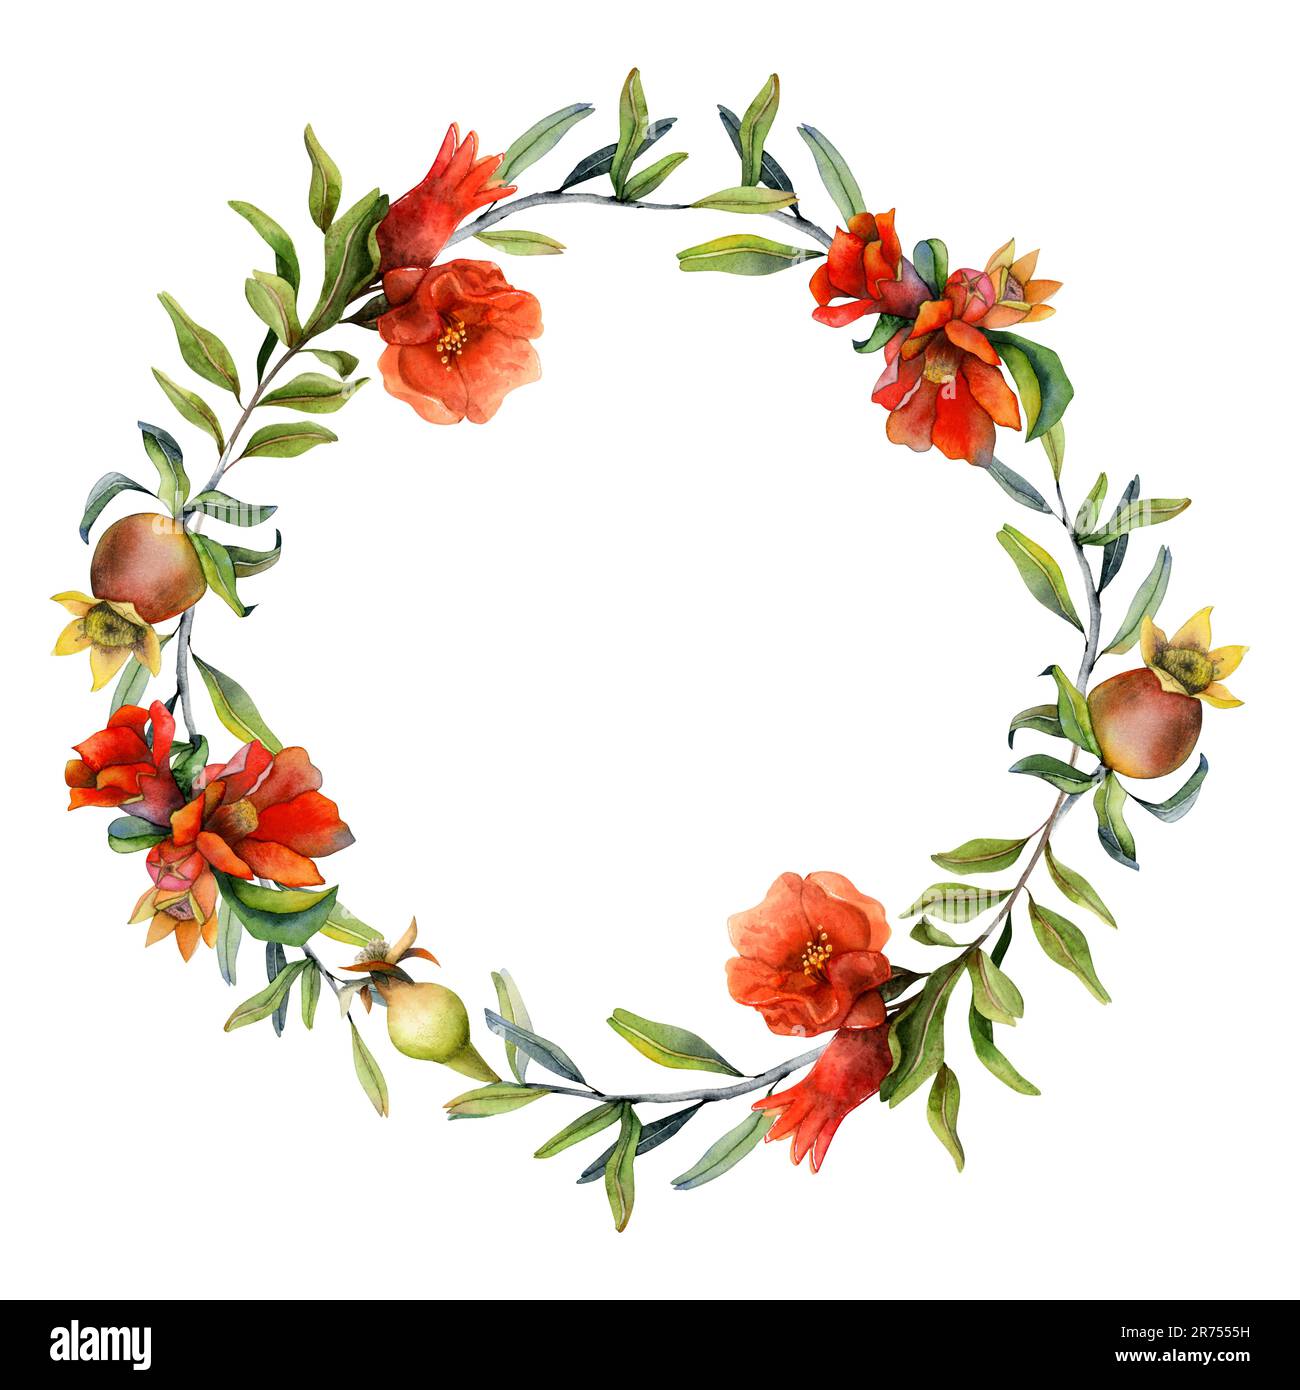 Red pomegranate flowers festive watercolor wreath round frame for Rosh Hashanah, wedding cards. Hand drawn illustration Stock Photo